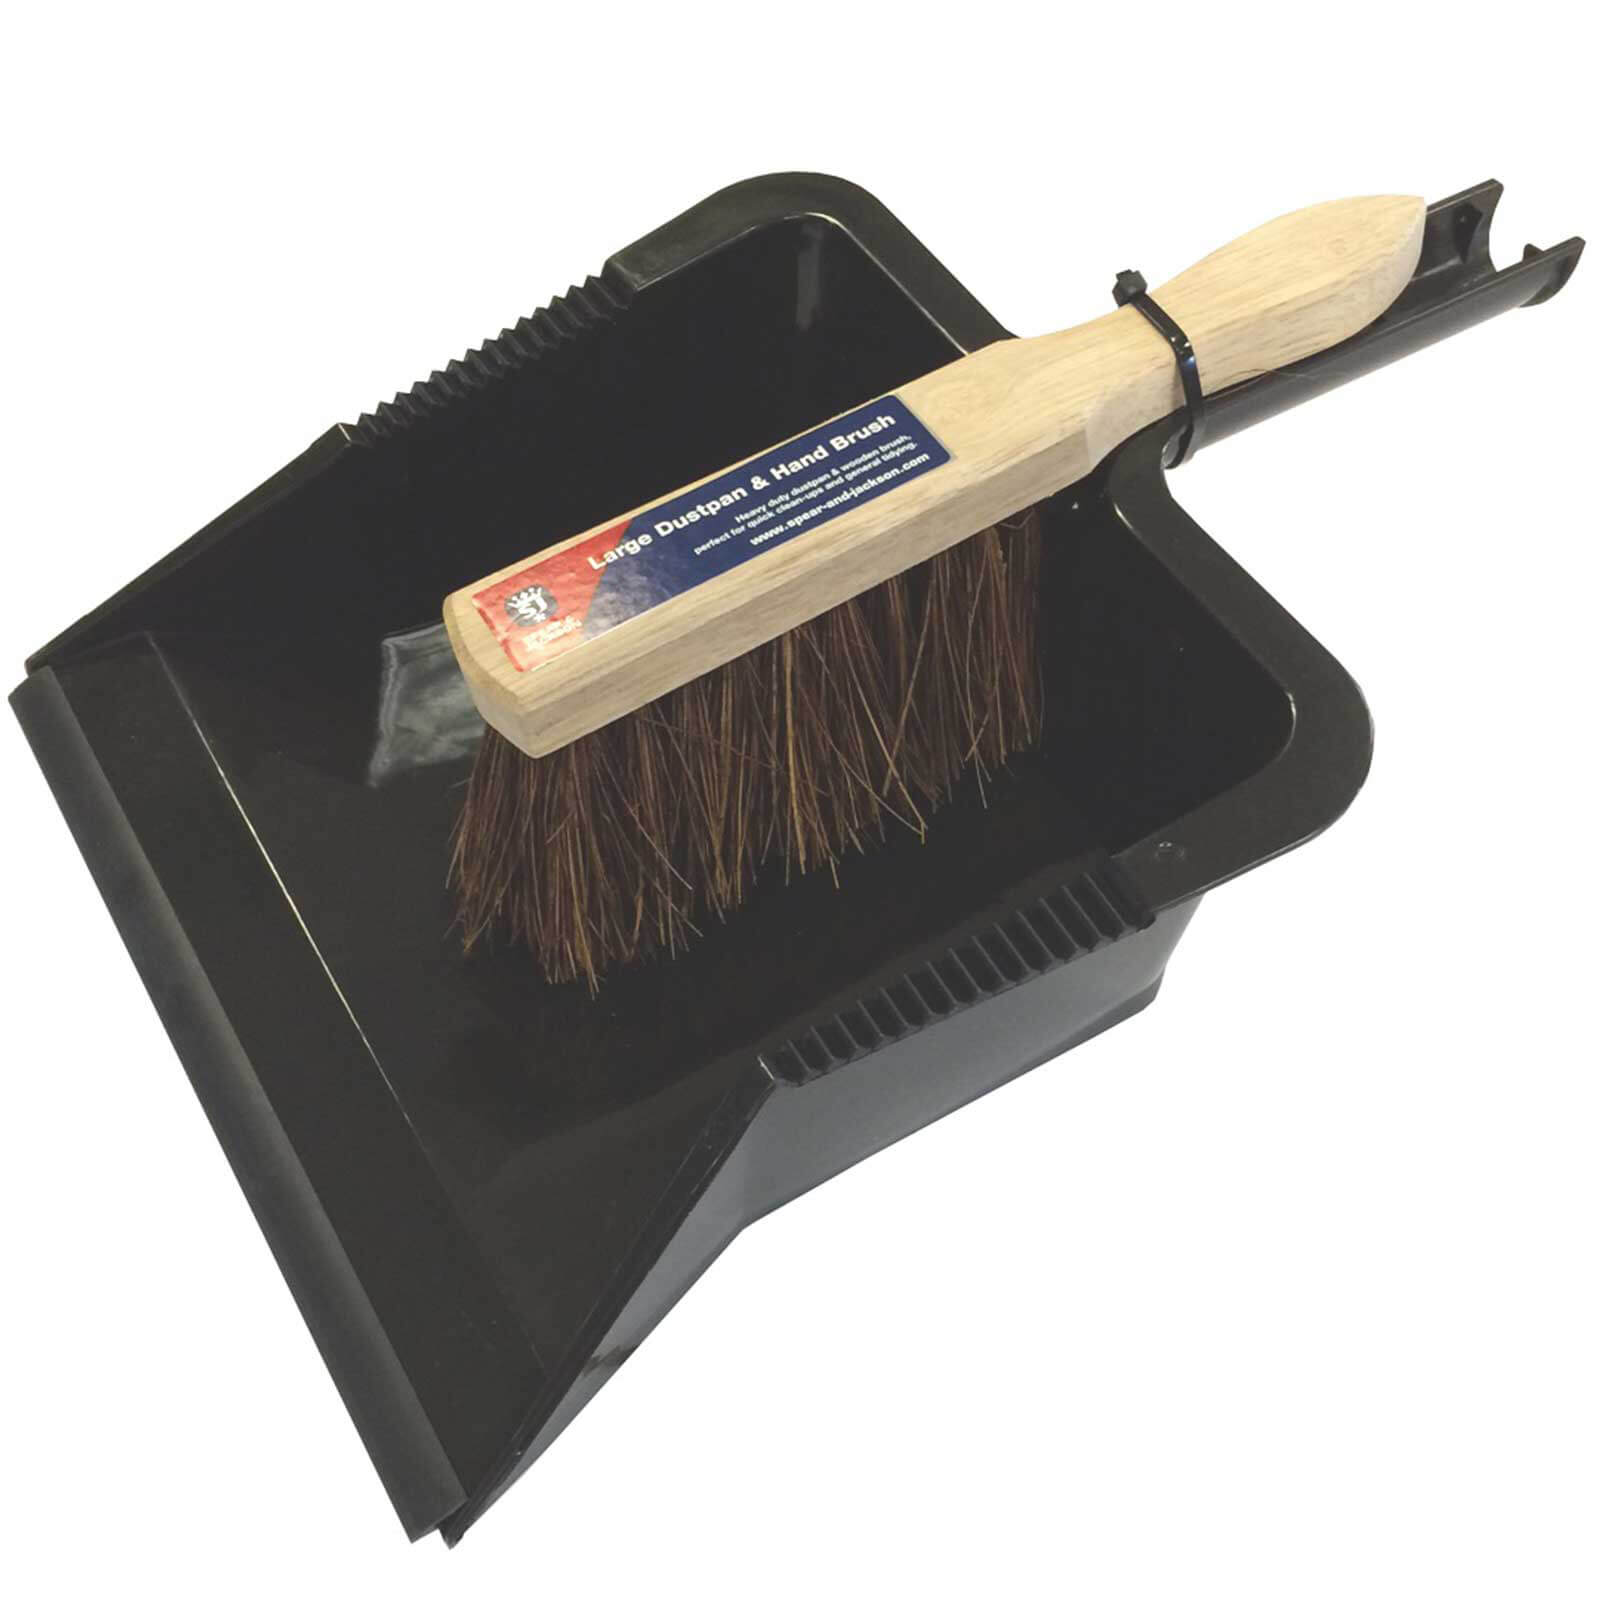 Image of Spear and Jackson Garden Dustpan and Brush